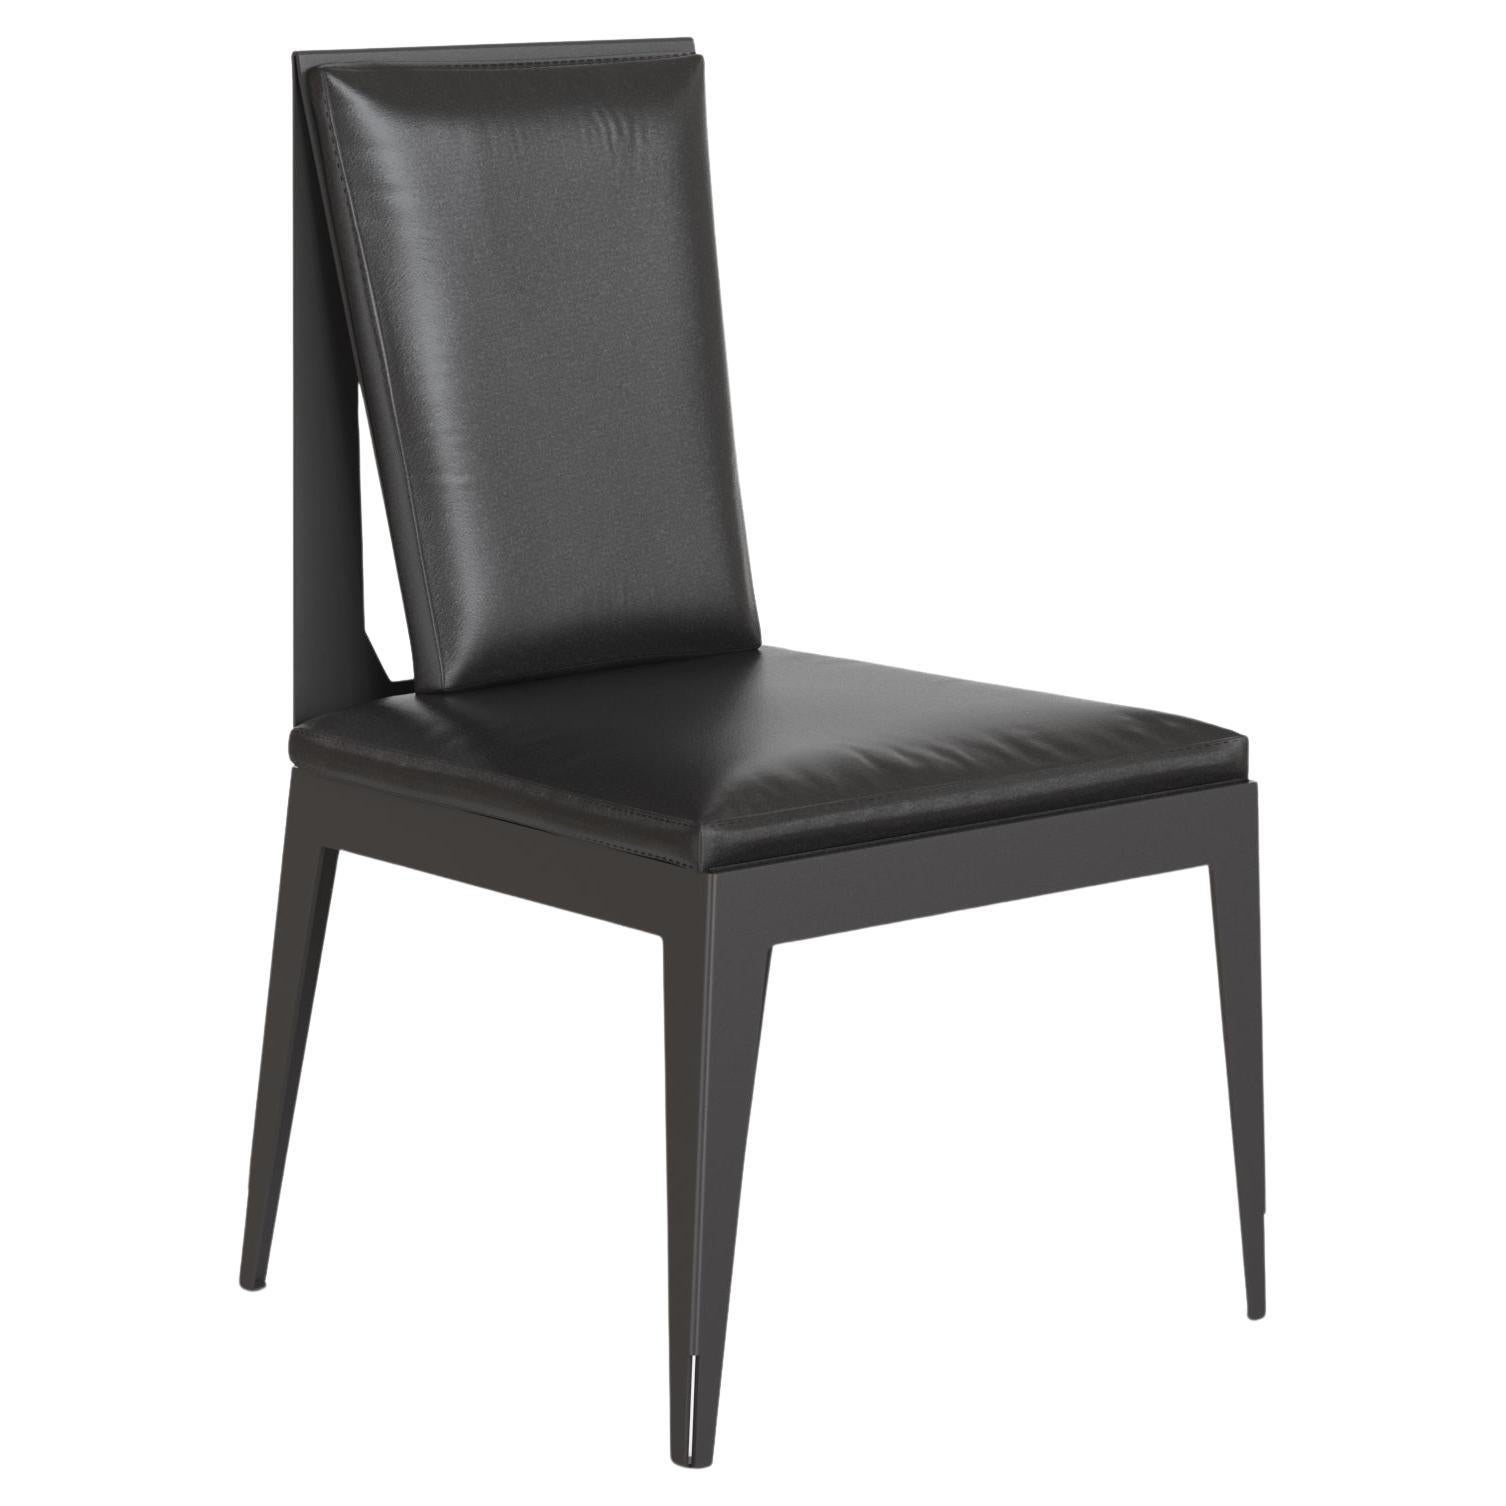 West Coast Dining Chair For Sale